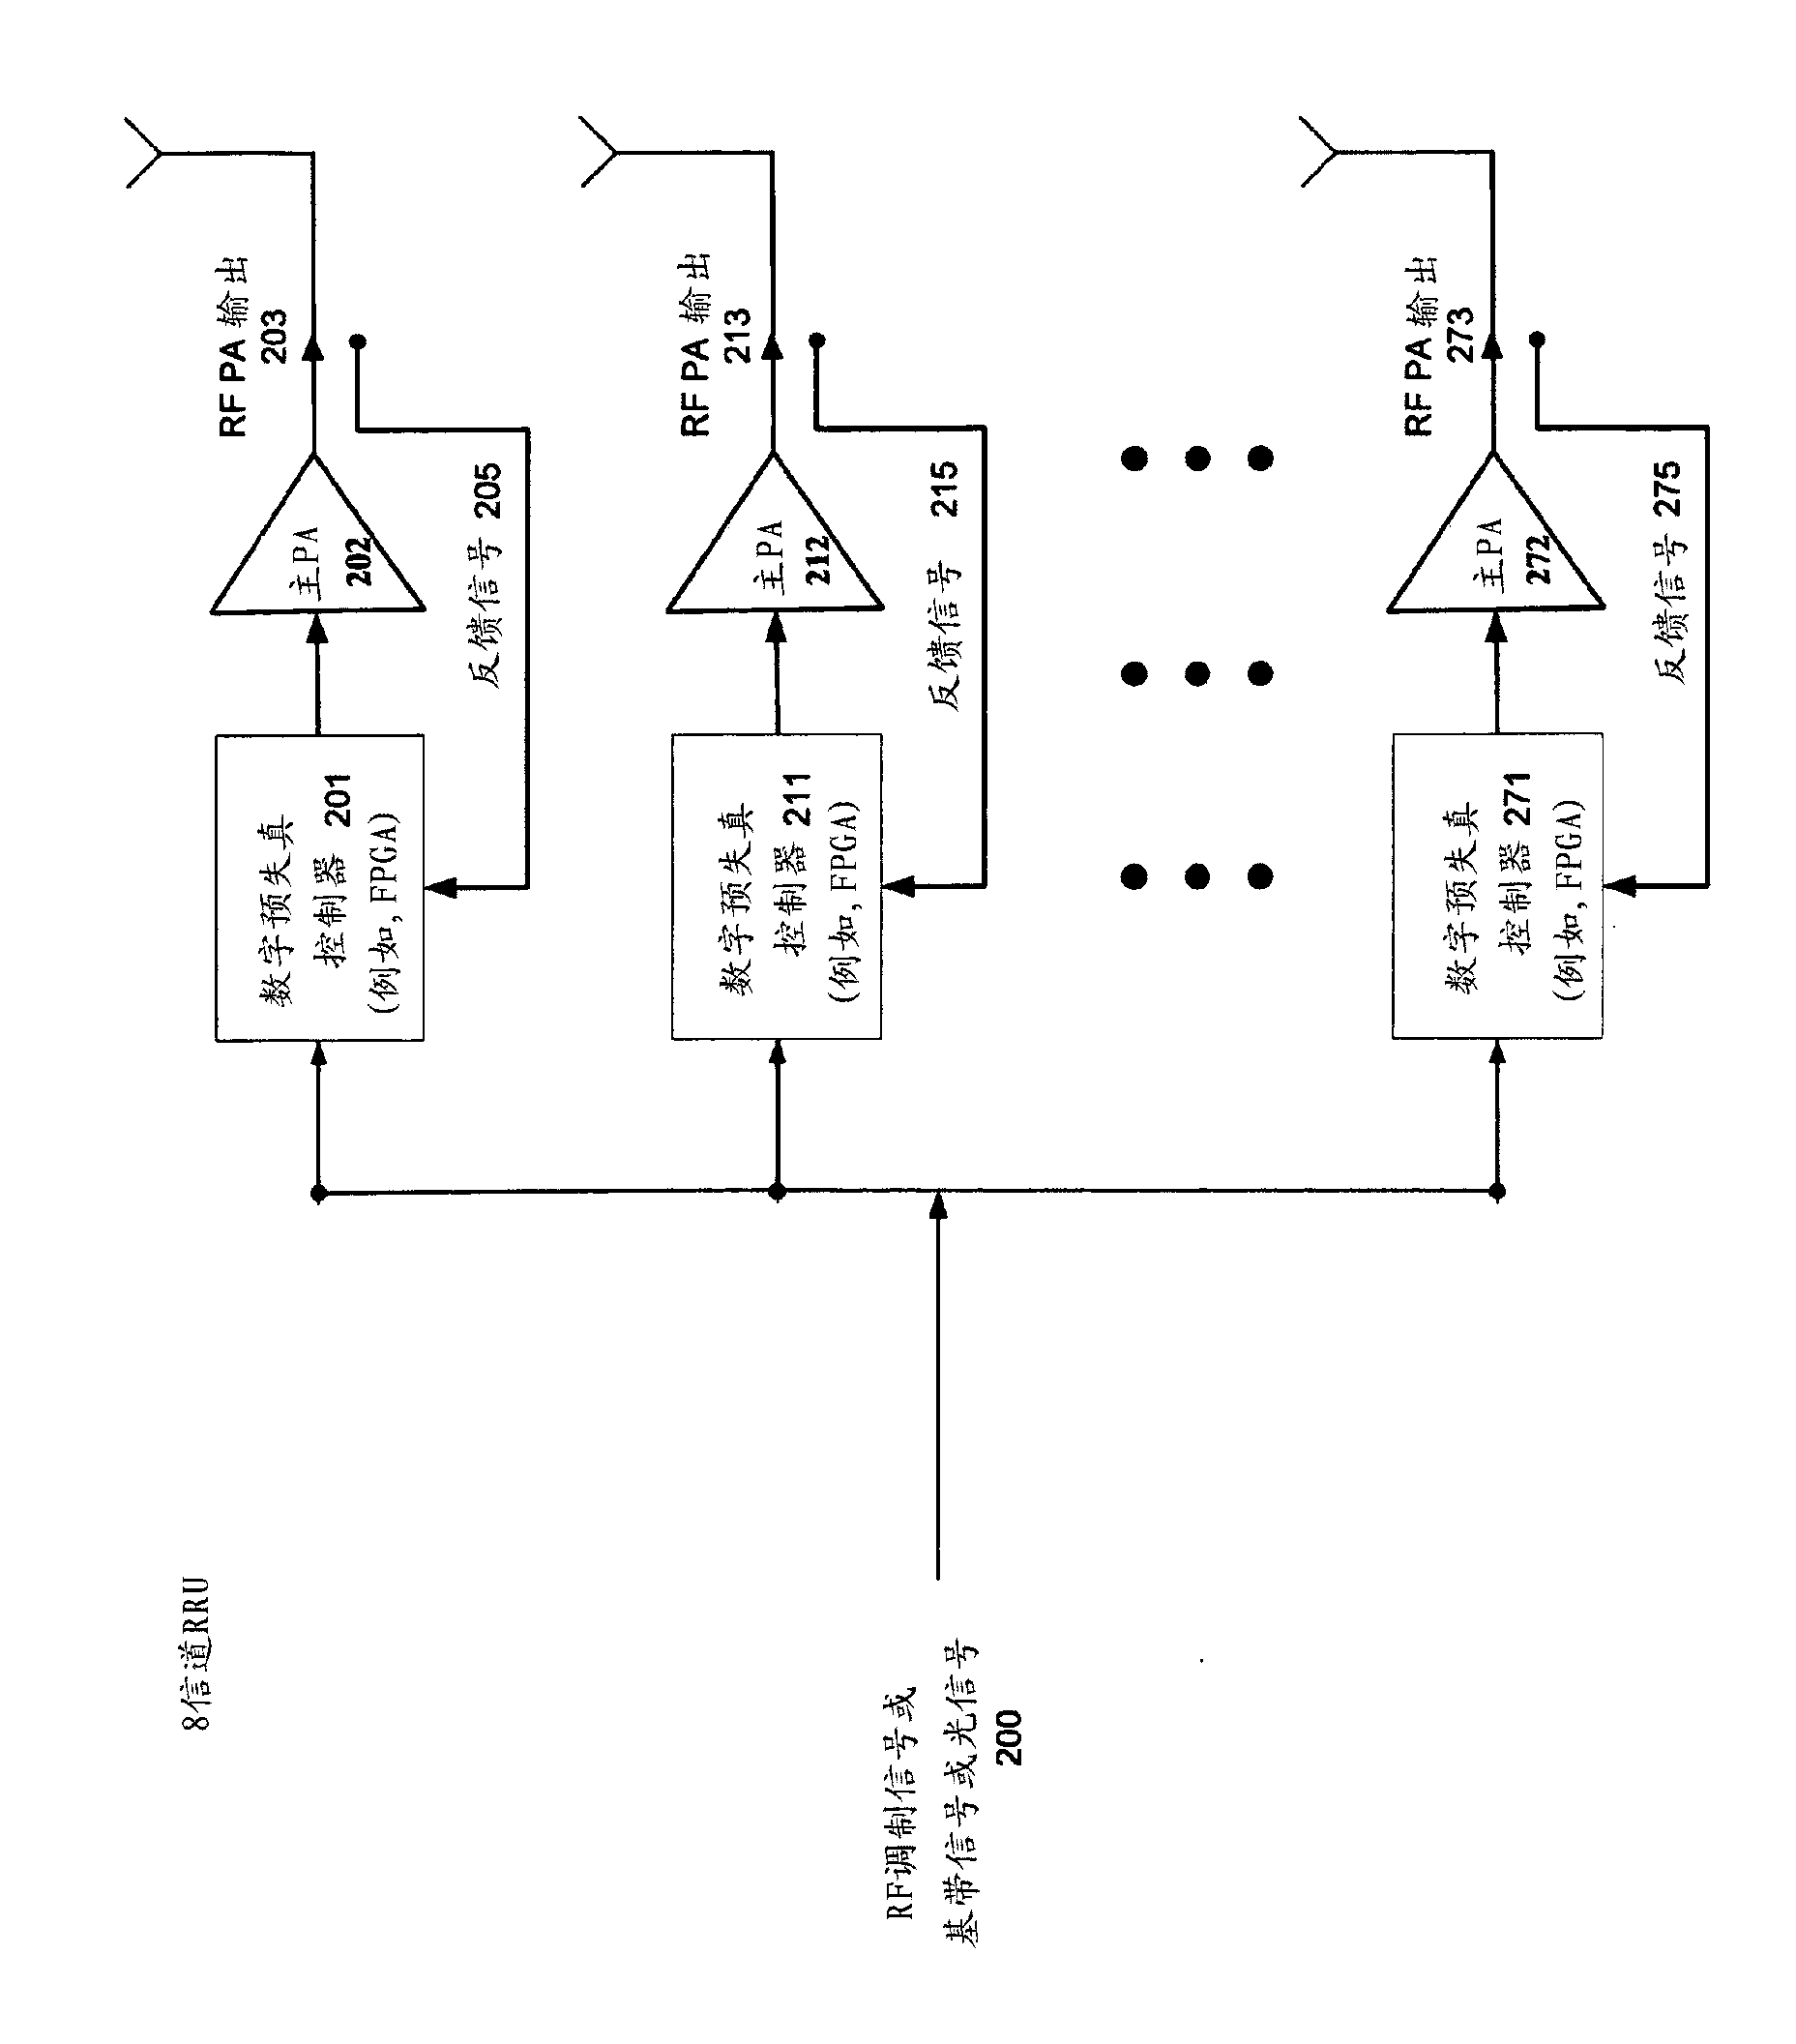 High efficiency, remotely reconfigurable remote radio head unit system and method for wireless communications